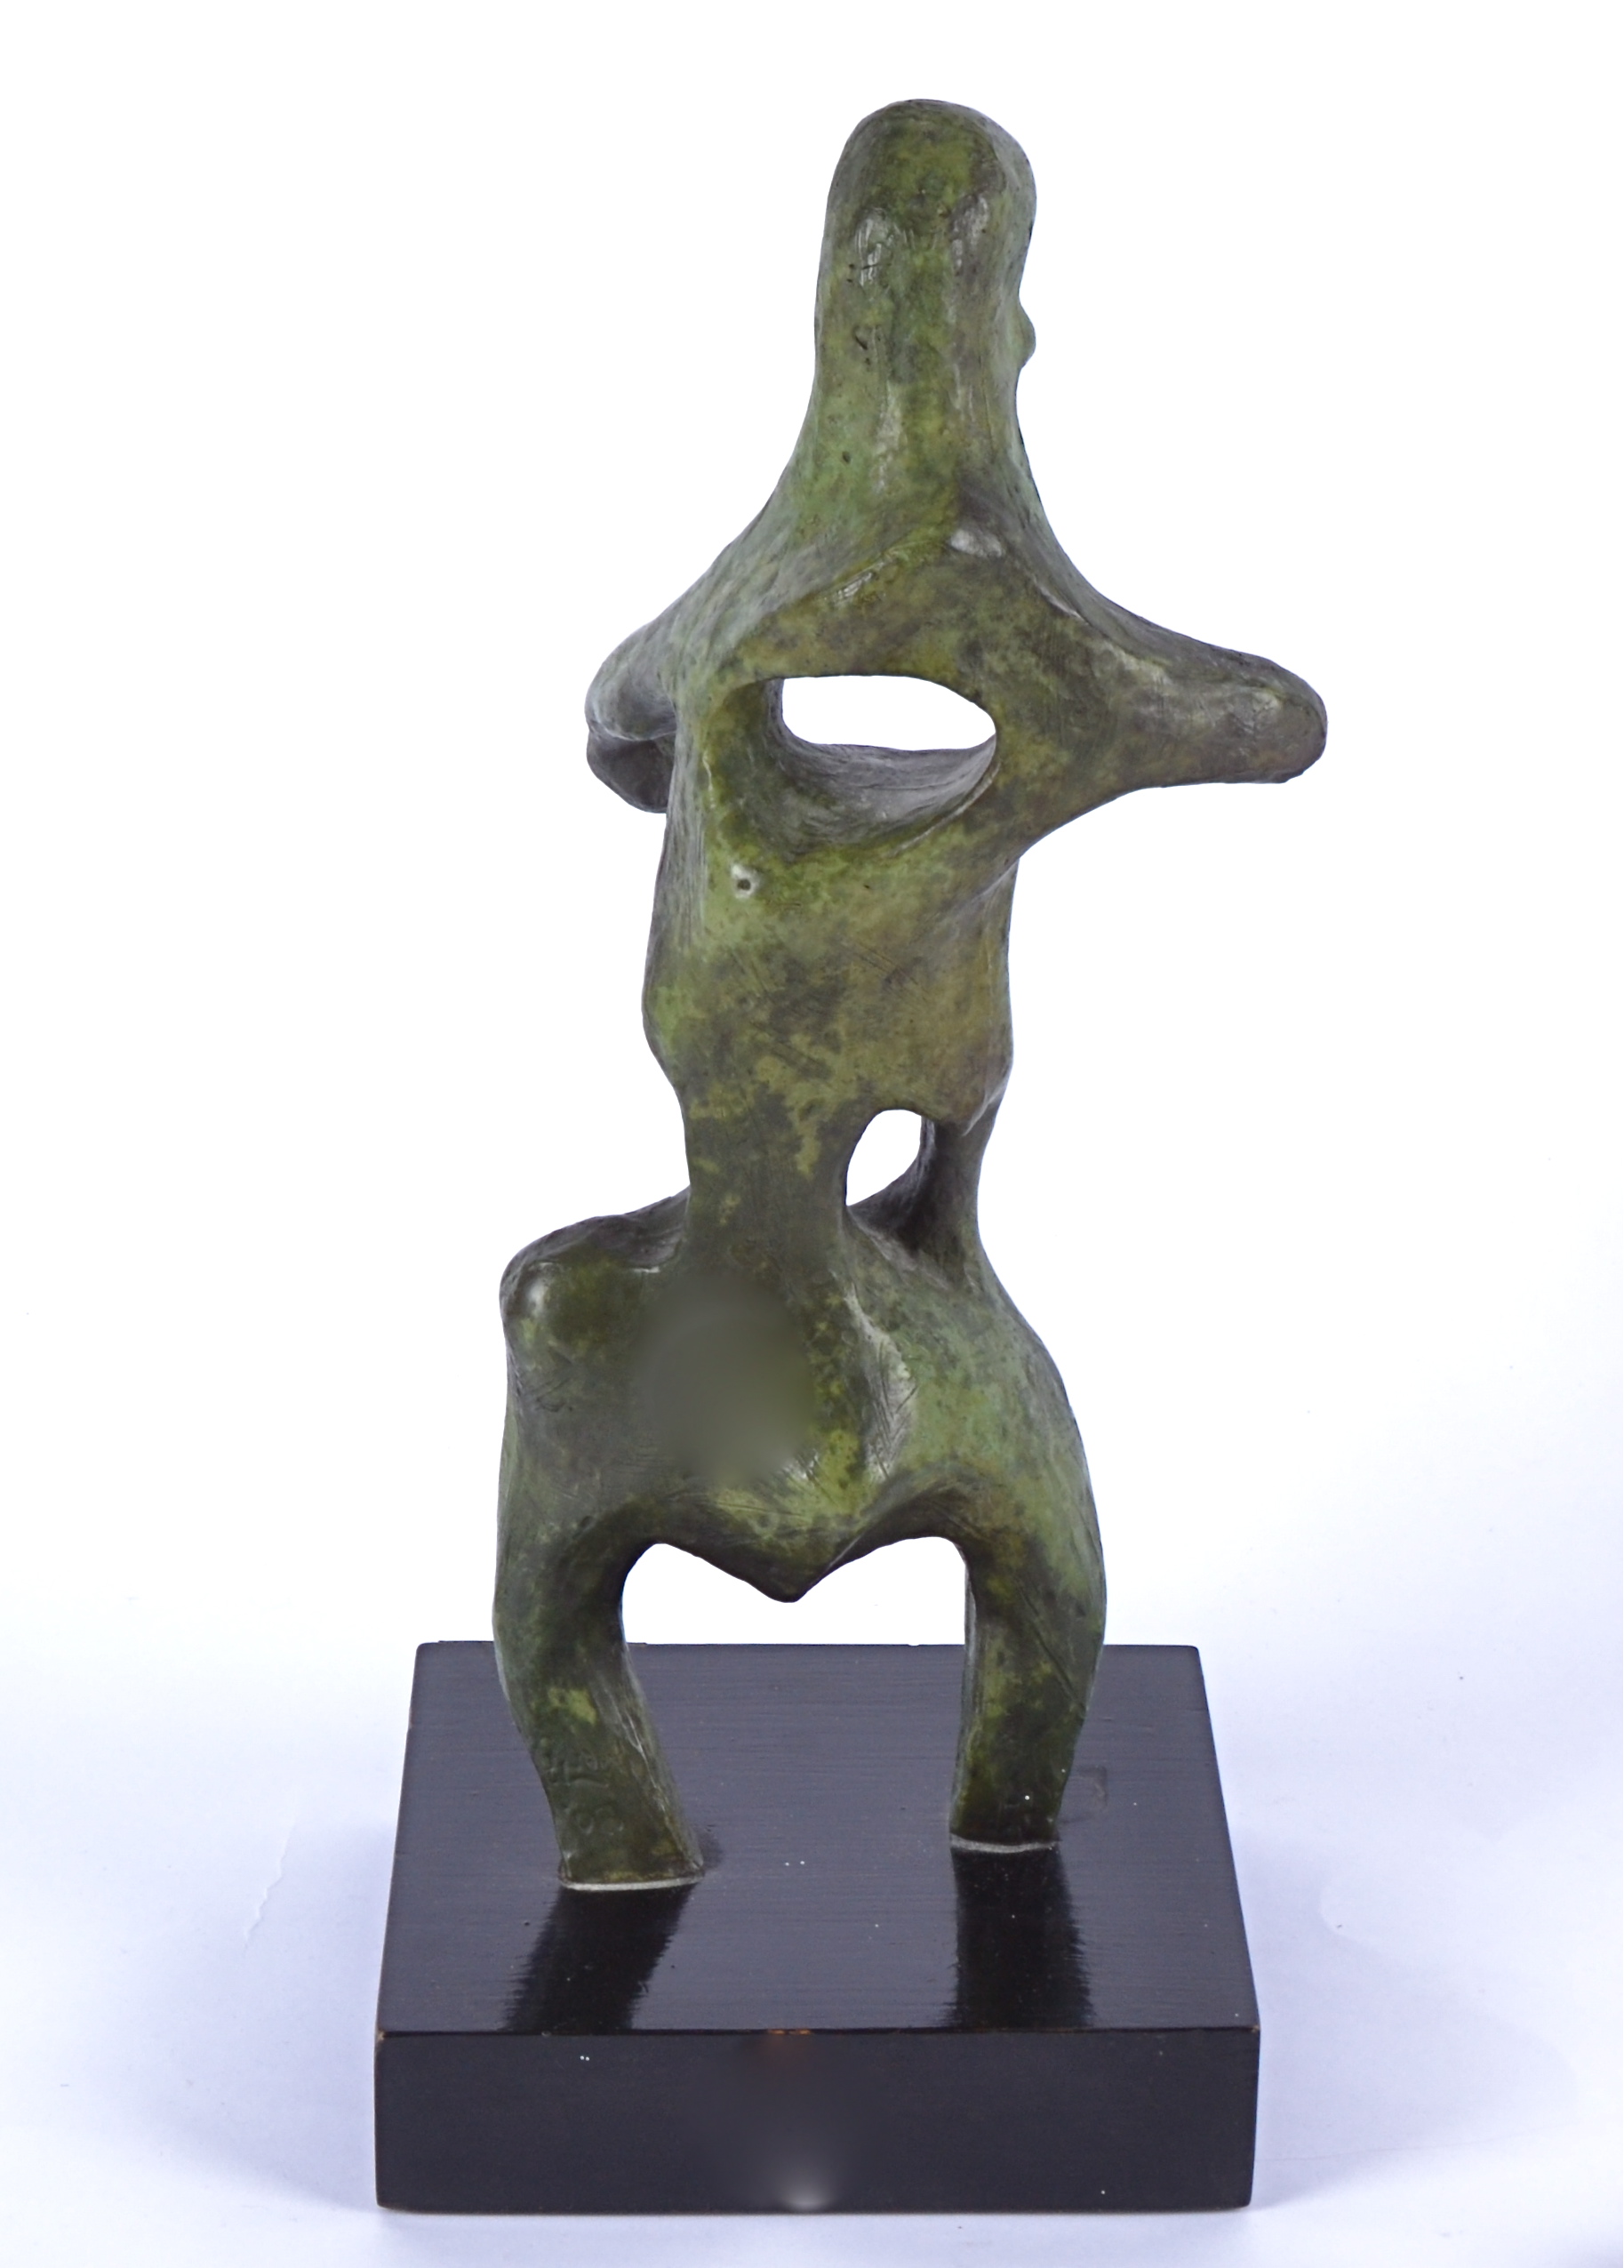 Eli Ilan (1928-1982) 'Gladiator' bronze maquette, mounted on a square wooden base with a plaque, - Image 5 of 9